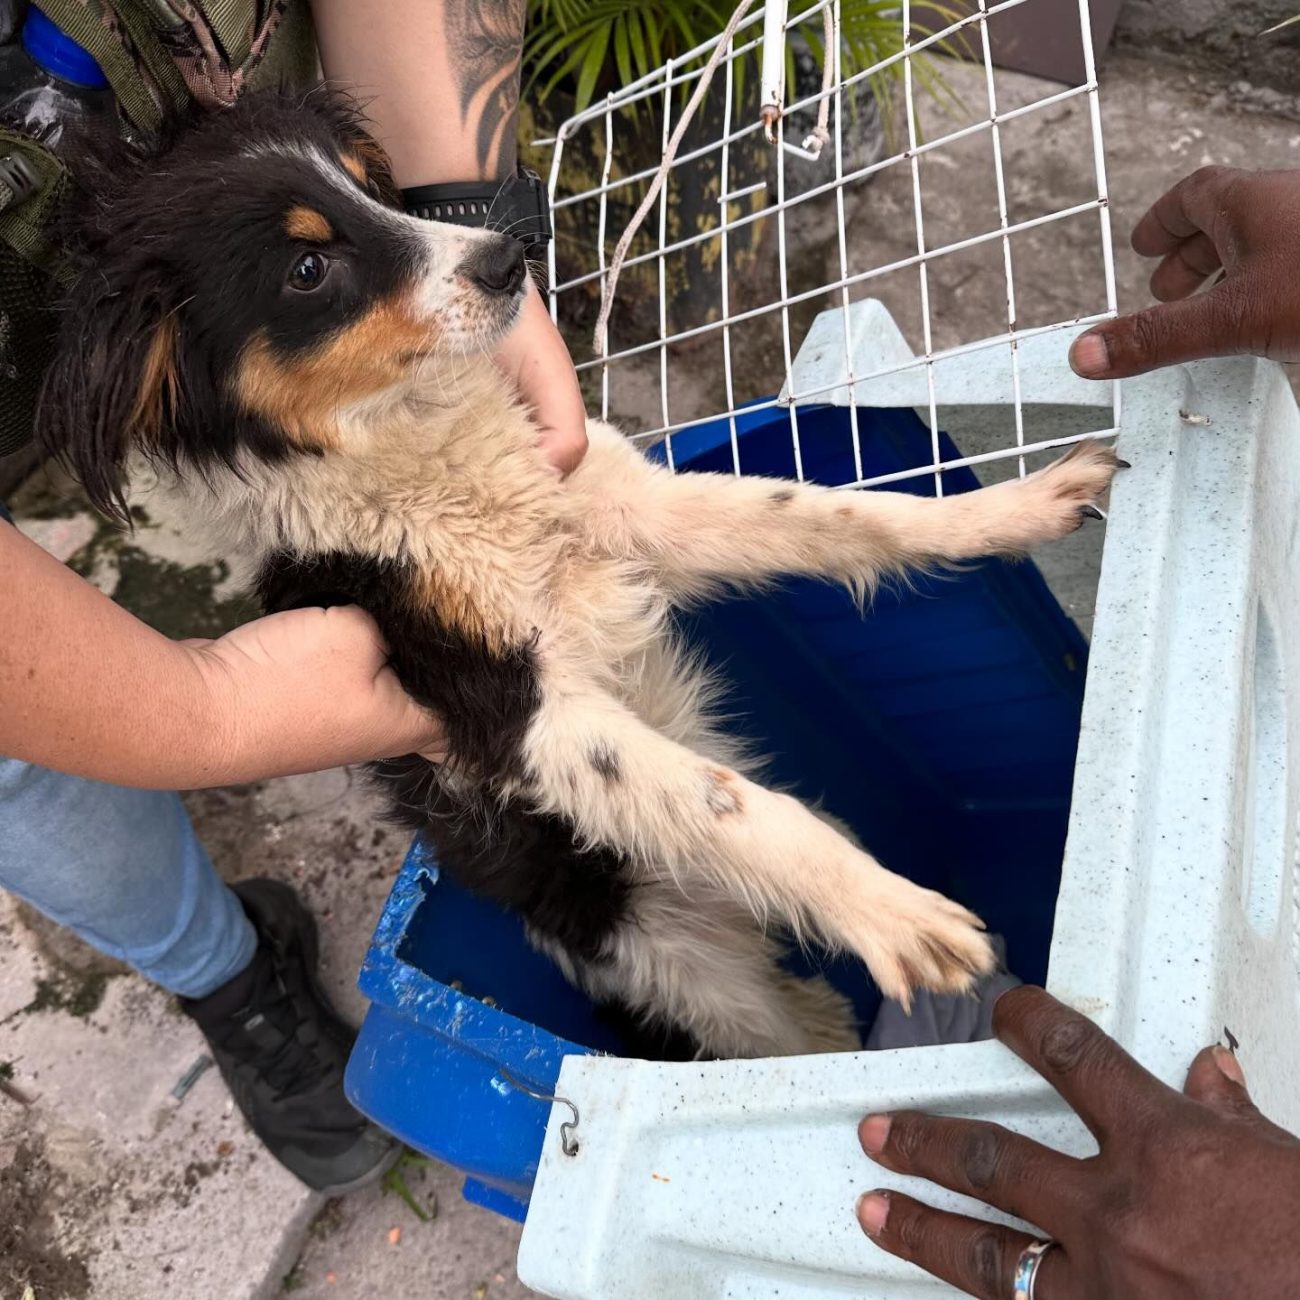 One of the dogs collected during the rescue.  The animals were sent to Dibea Palhoça and will be available for responsible adoption when they are healthy - Bem Estar Animal Palhoça/Disclosure/ND